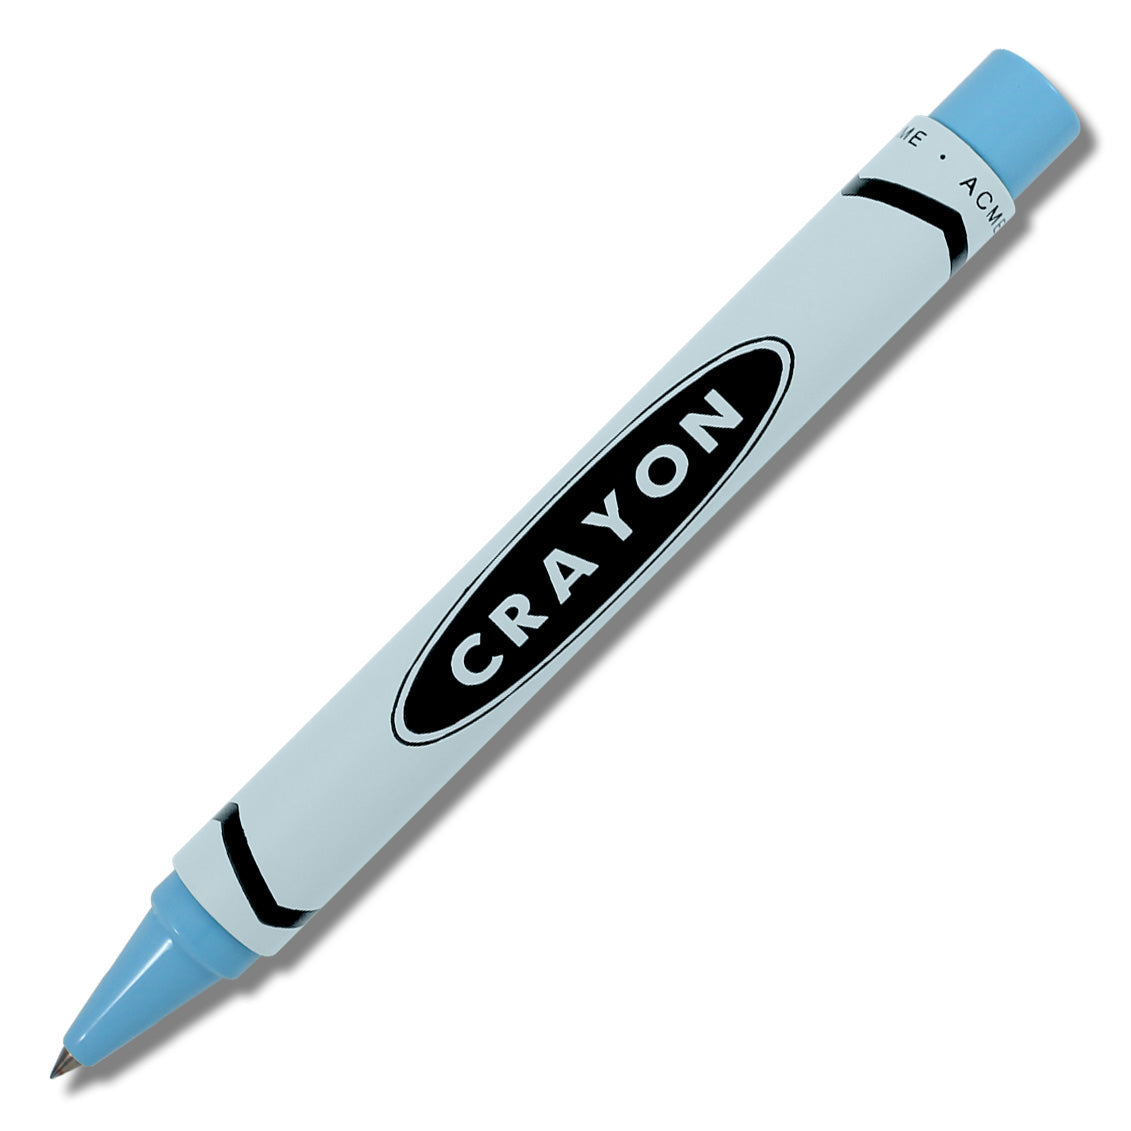 ACME Studio Crayon - Retractable Roller Ball Pen by Adrian Olabuenaga. Blue/Pink/Red/Purple/Teal/Yellow